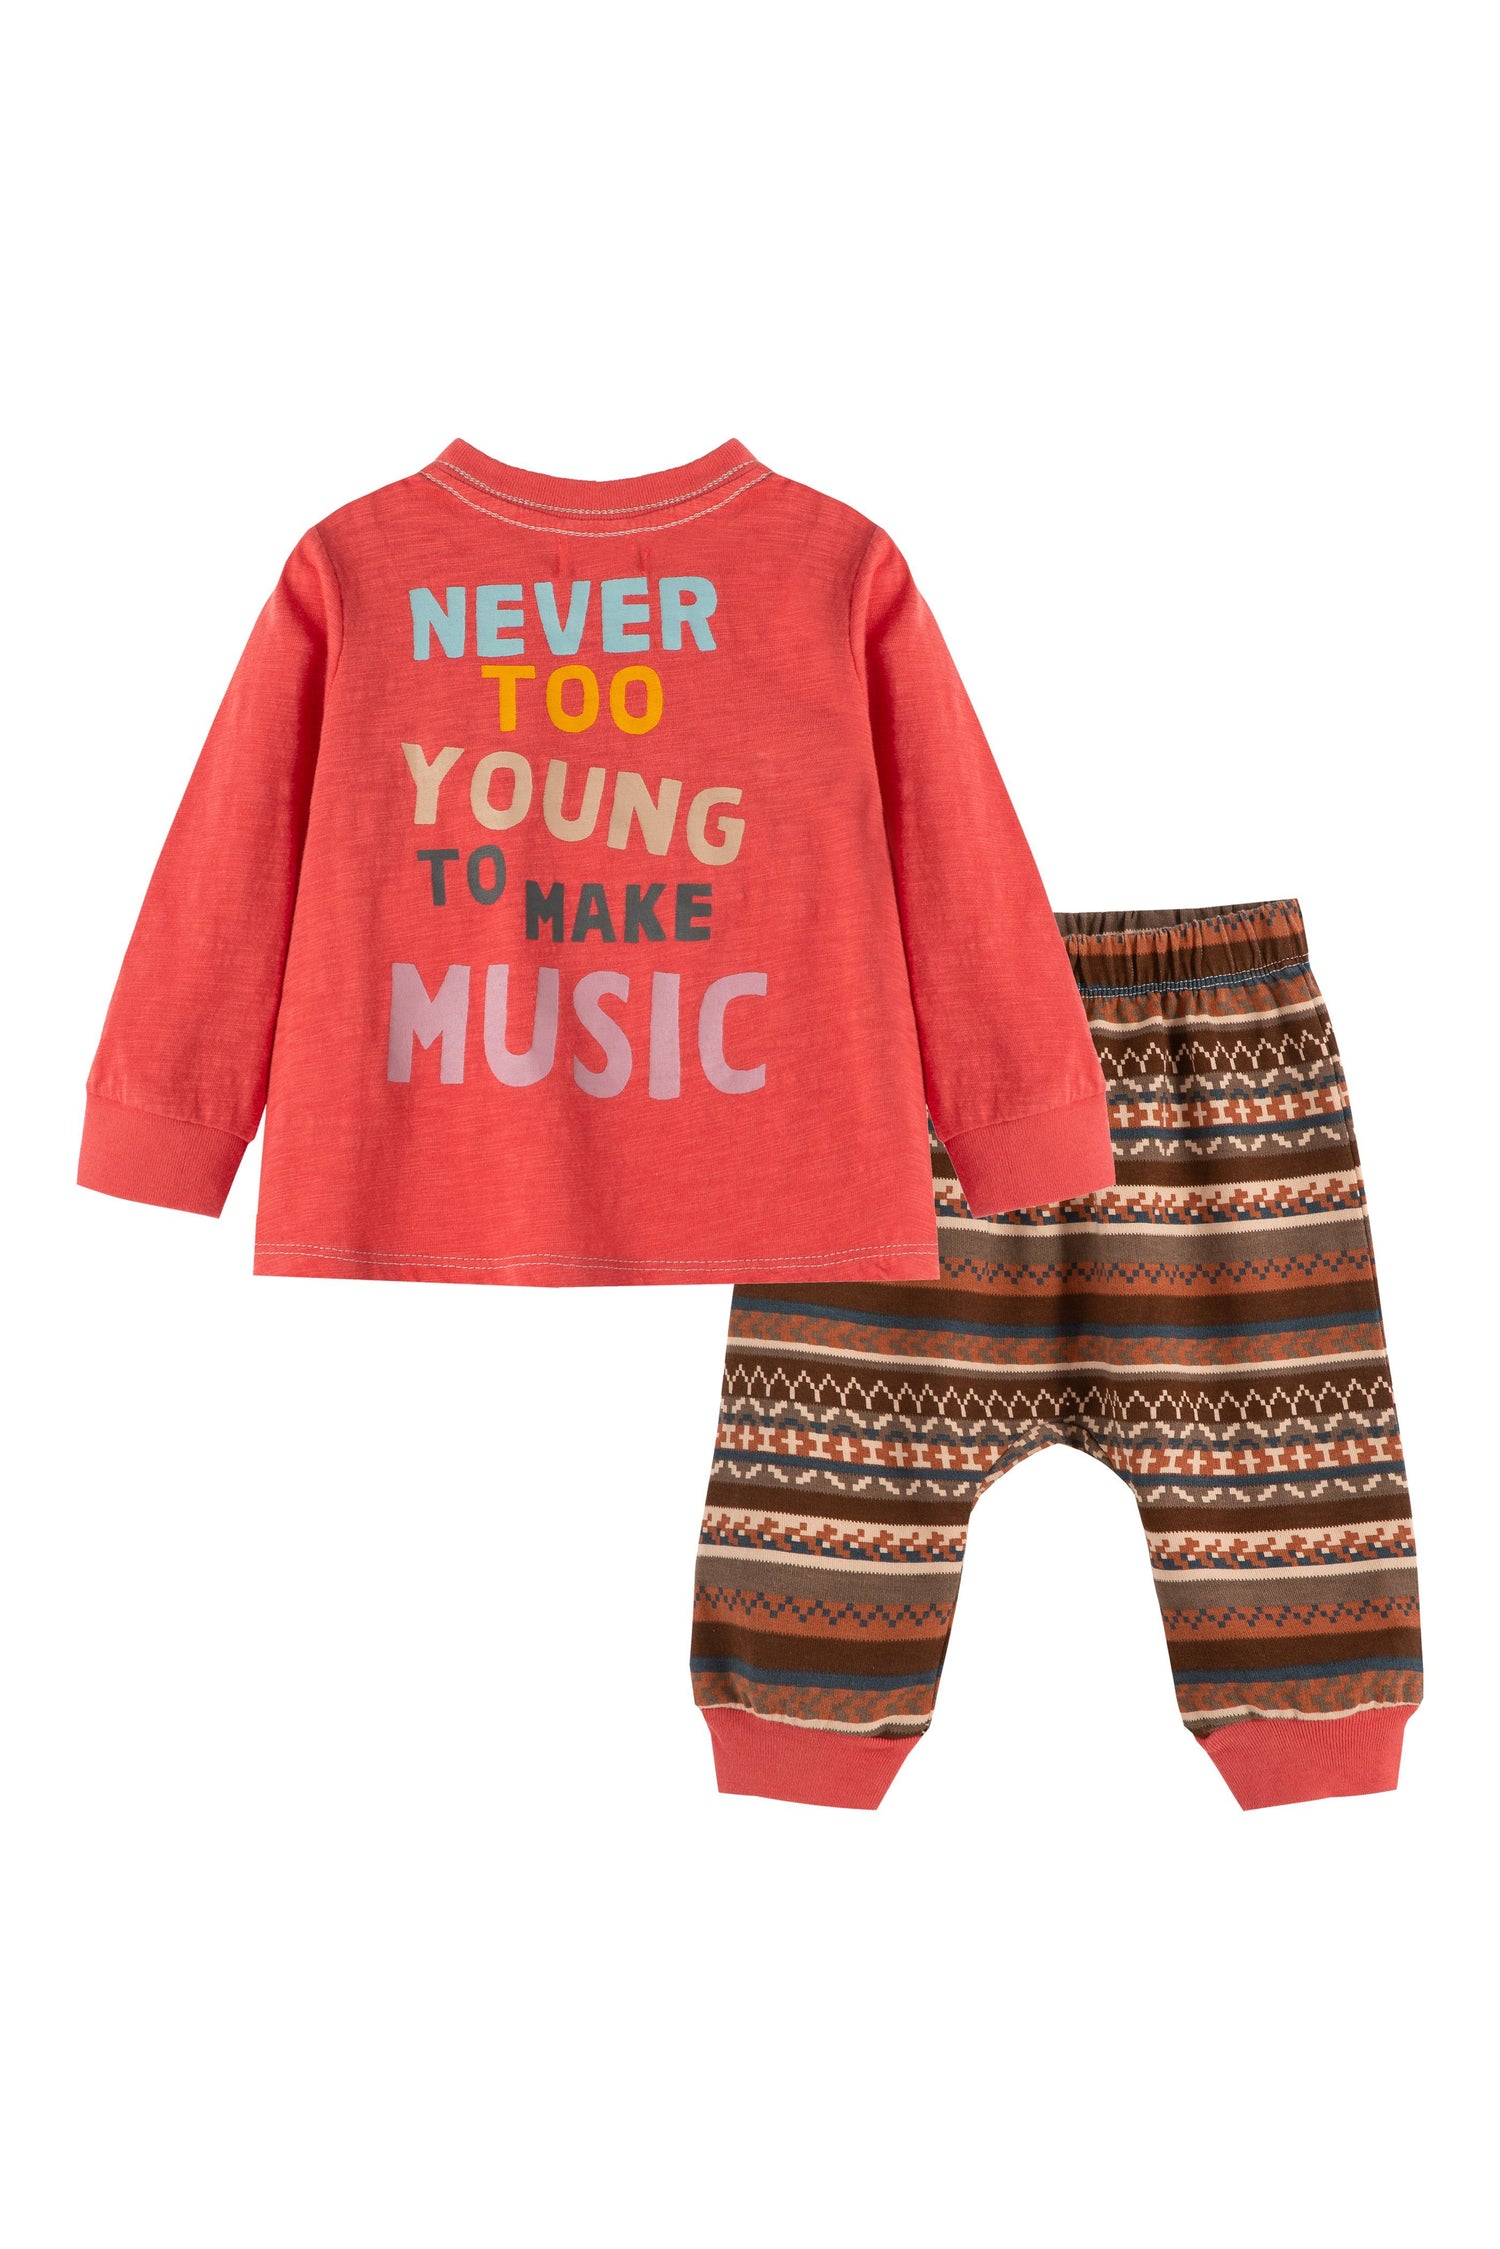 Back of red long sleeve t-shirt with words Never Too Young To Make Music and multi-pattern, brown striped sweatpants. 